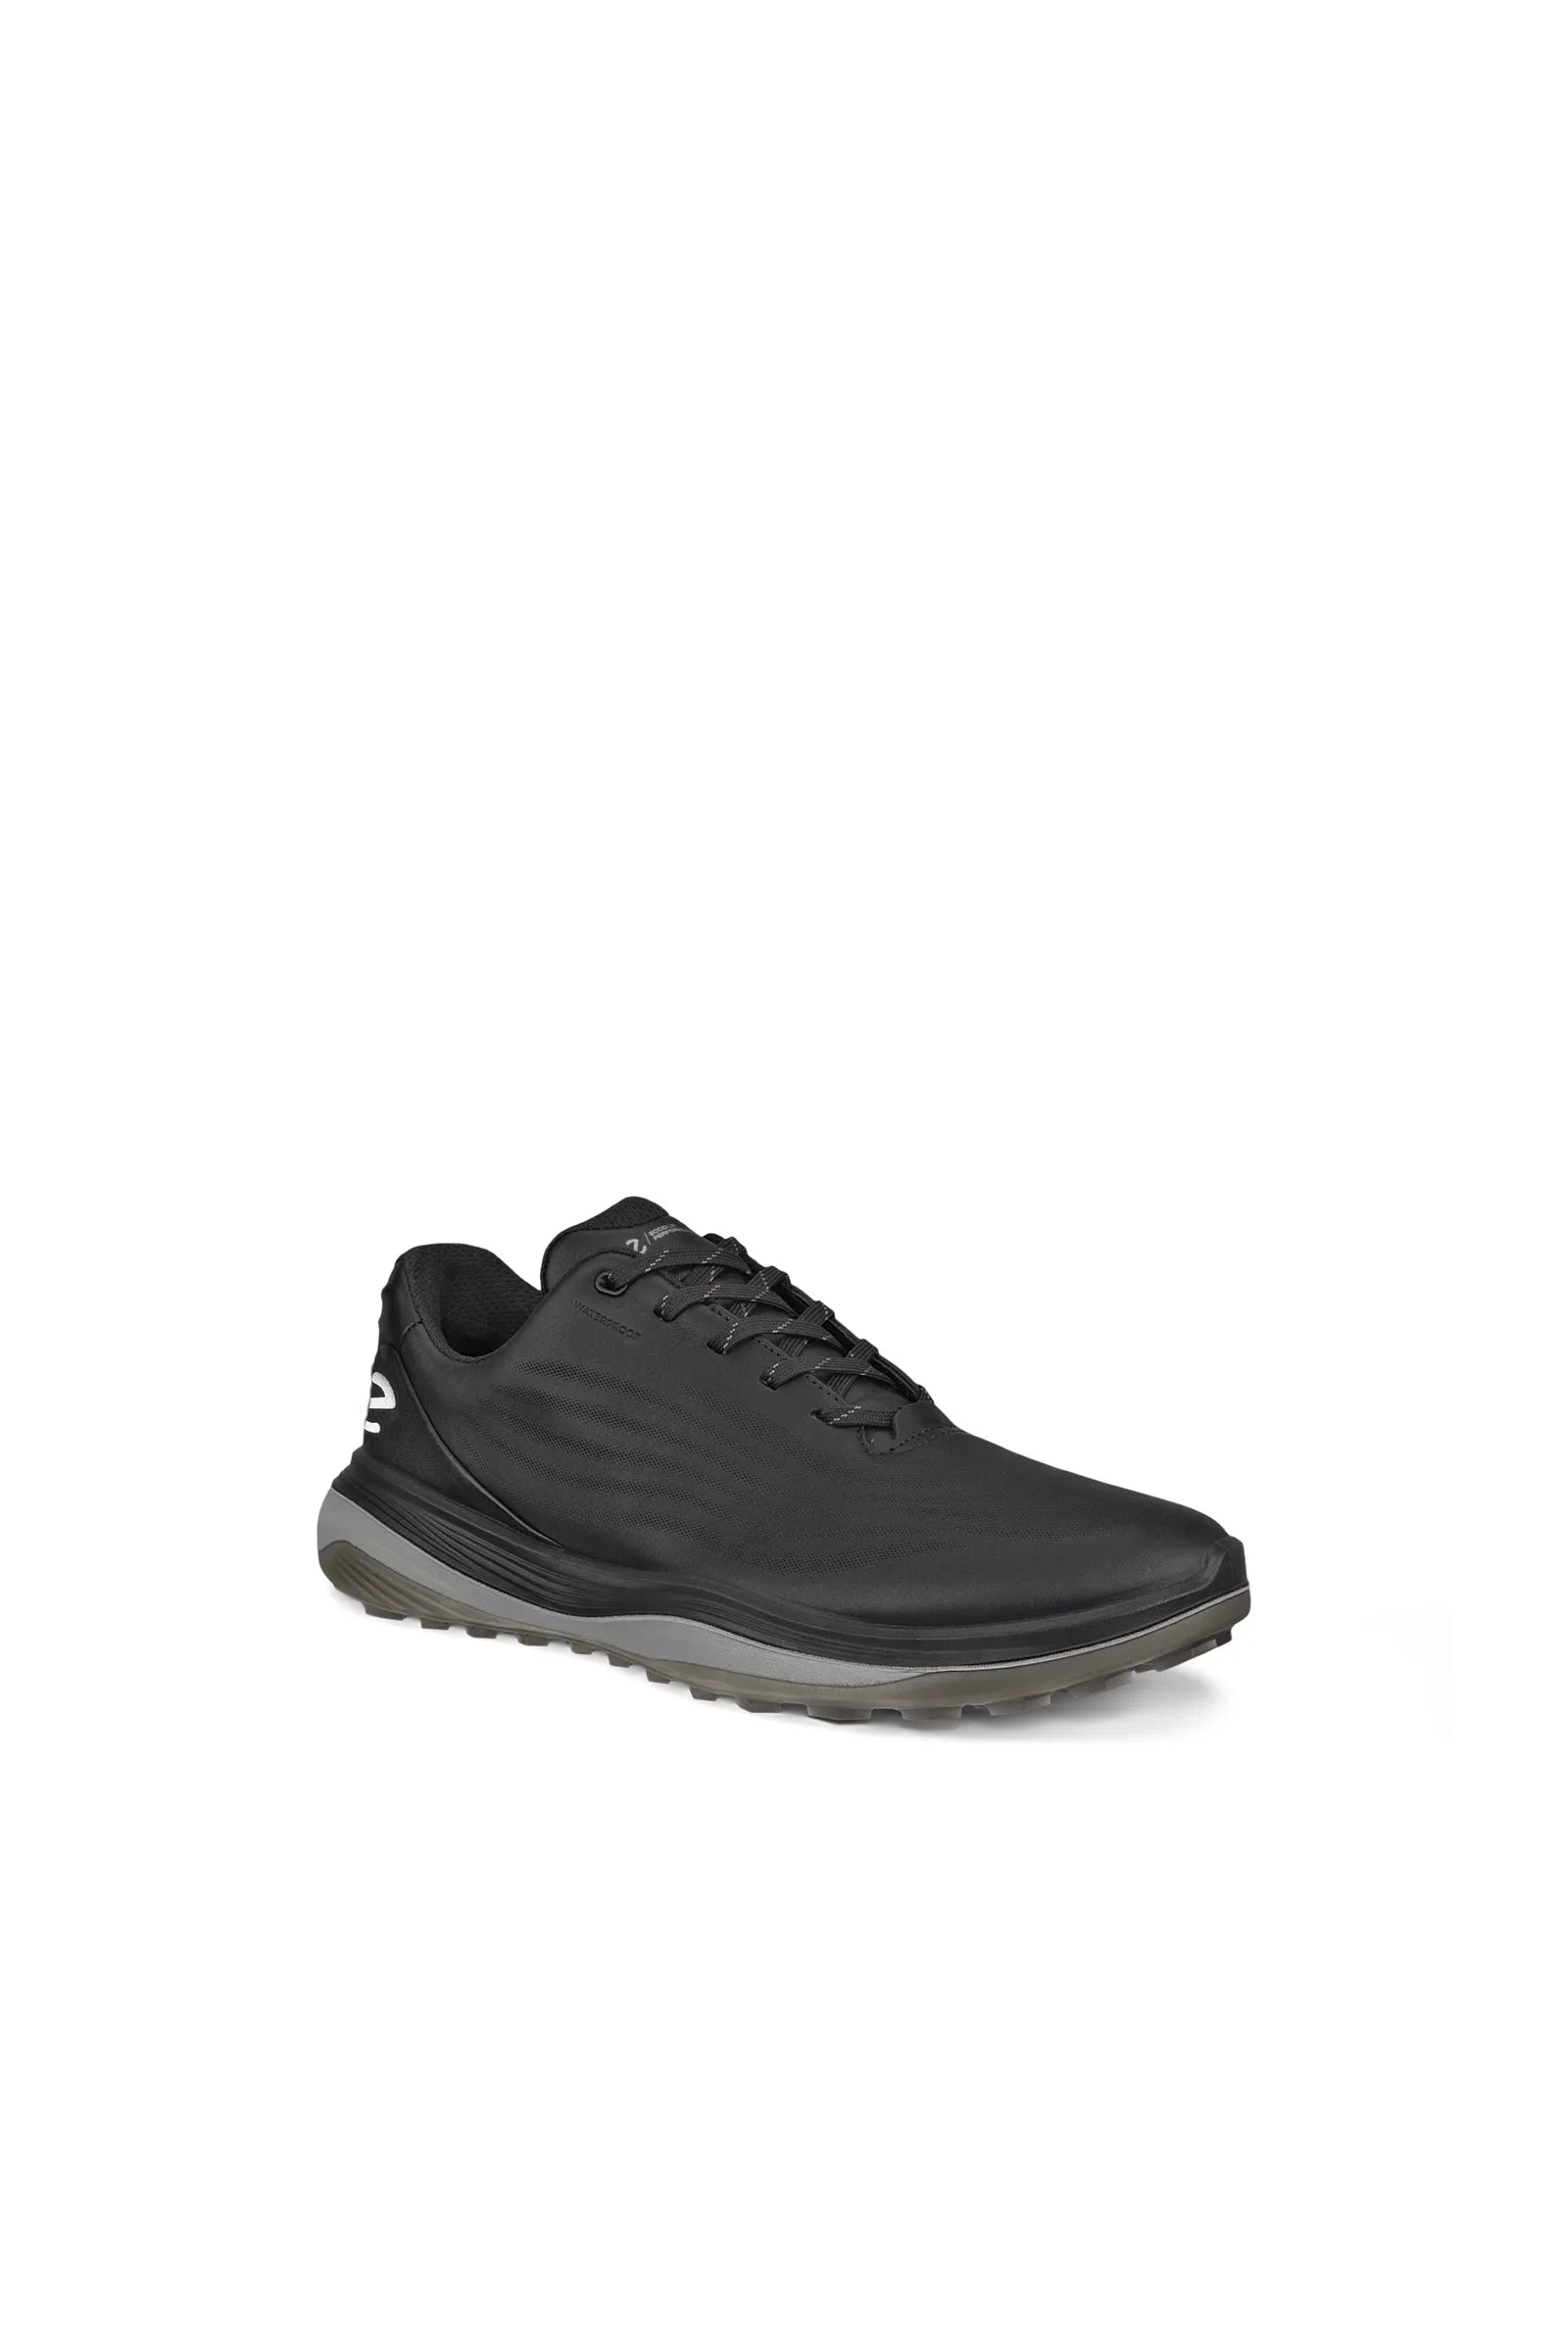 Ecco 132264-01001 Mens Black leather Golf shoes